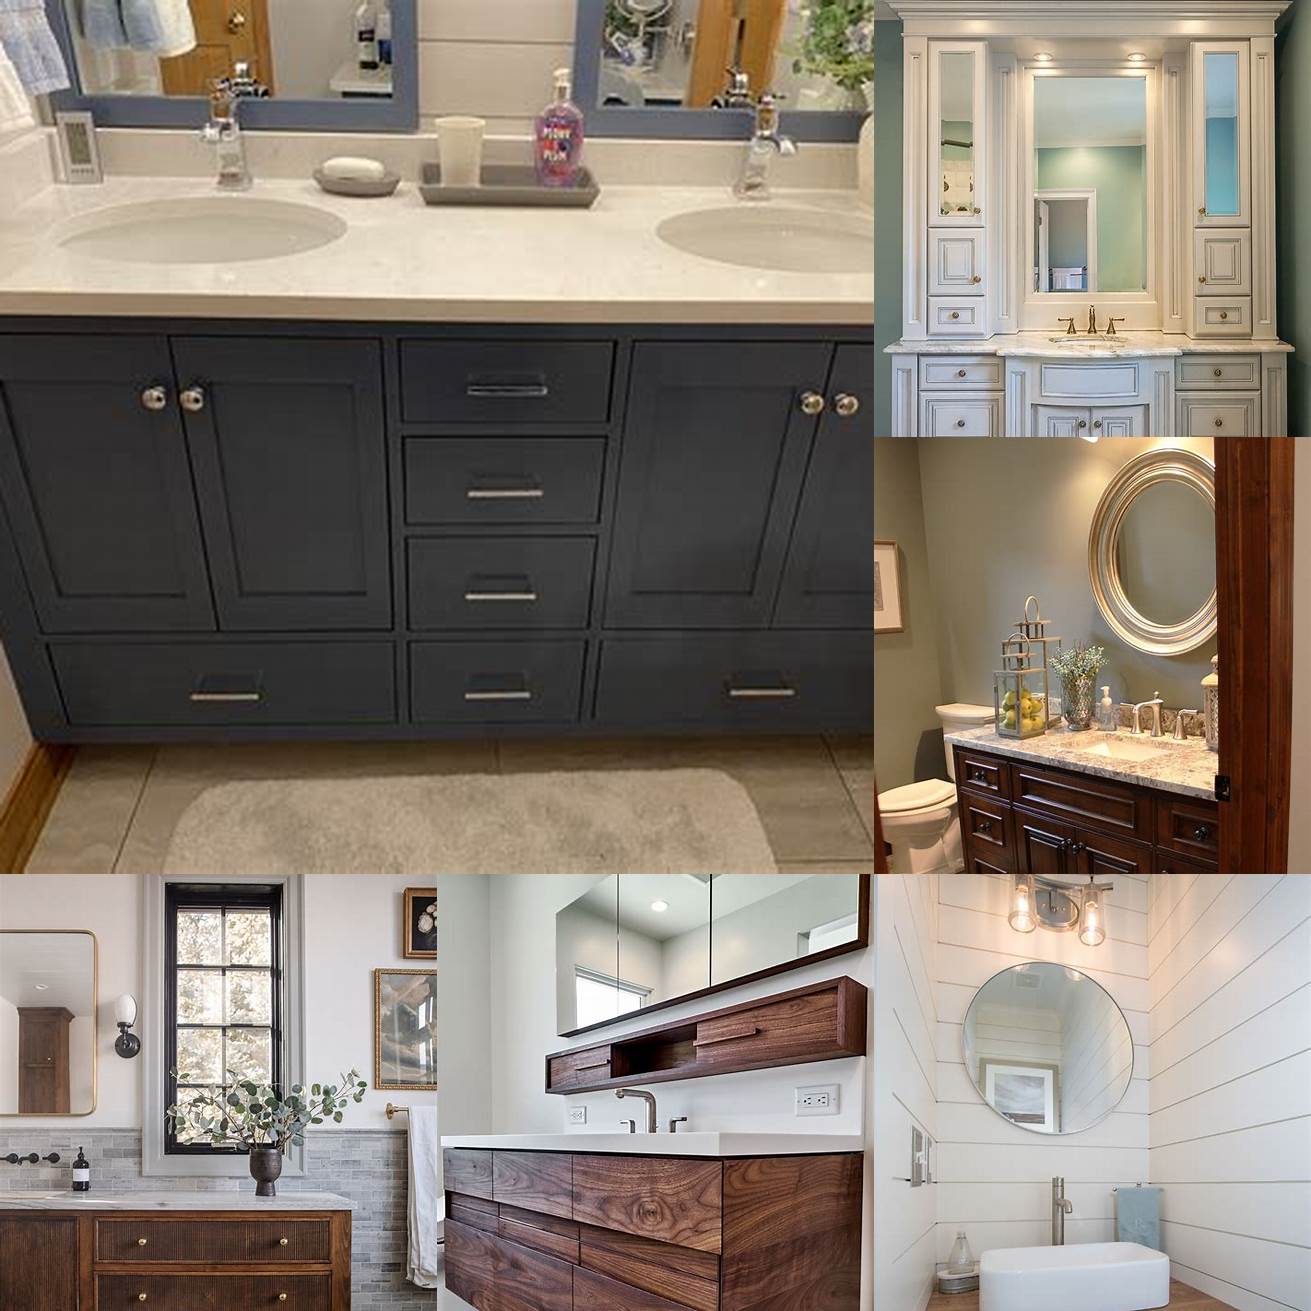 5 Custom-built vanity with integrated storage and lighting